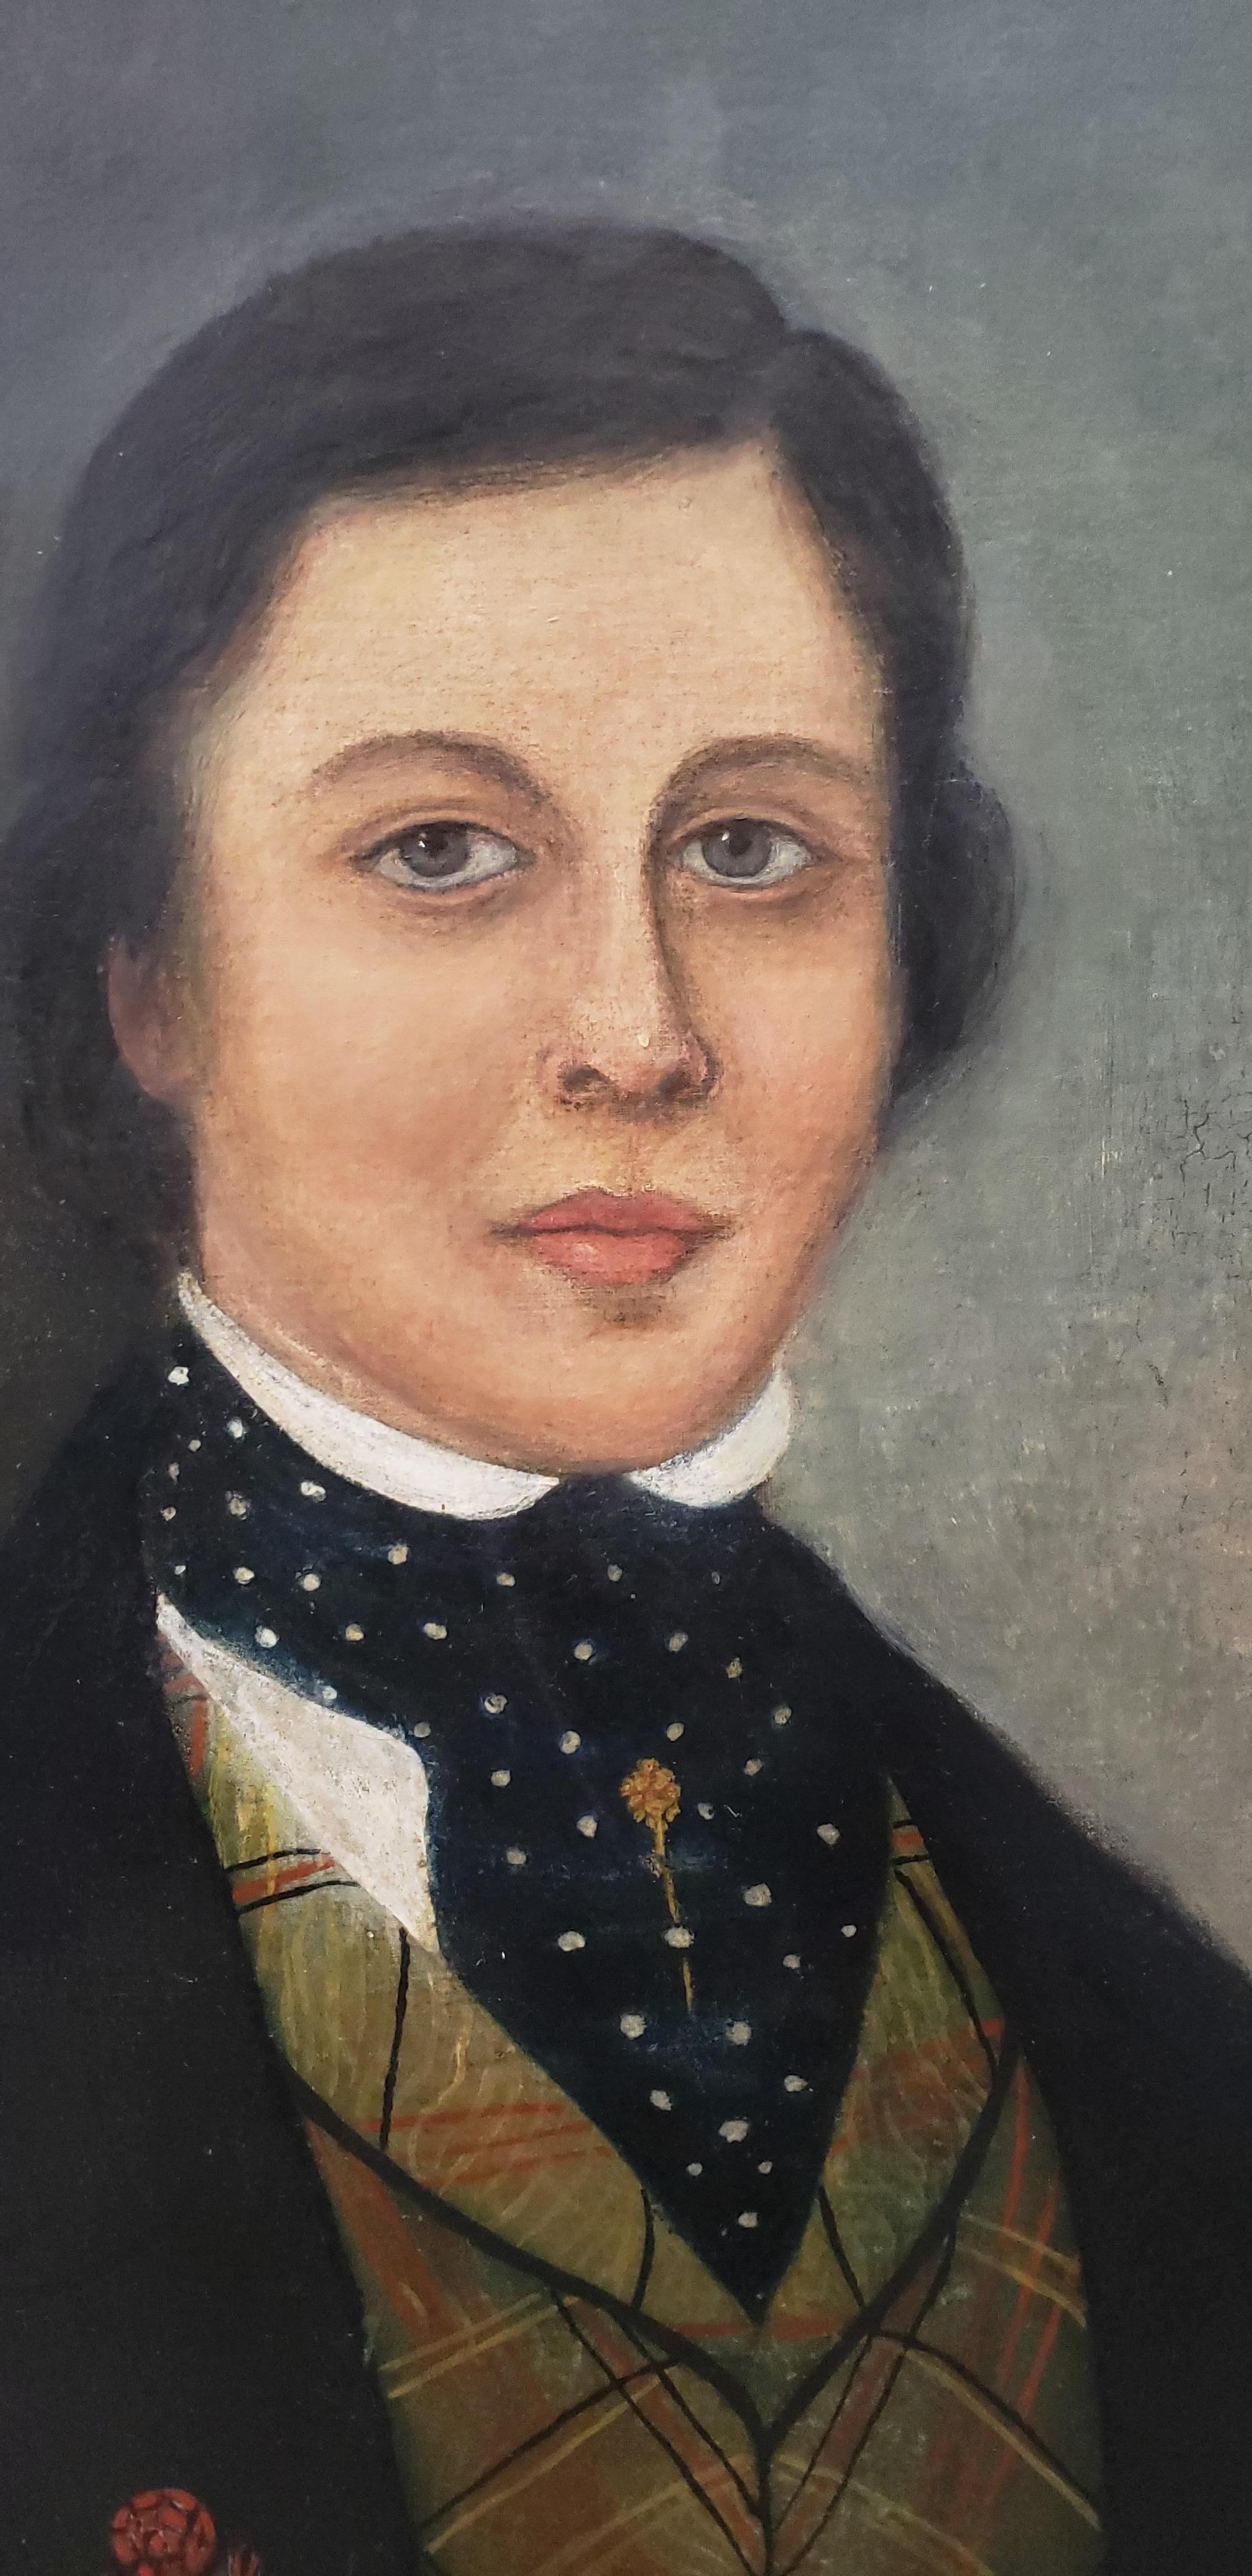 Early 19th century oil portrait of a handsome young man

An original painting of a young man wearing his best suit of clothes.

Original oil on canvas. No signature. Dimensions 23